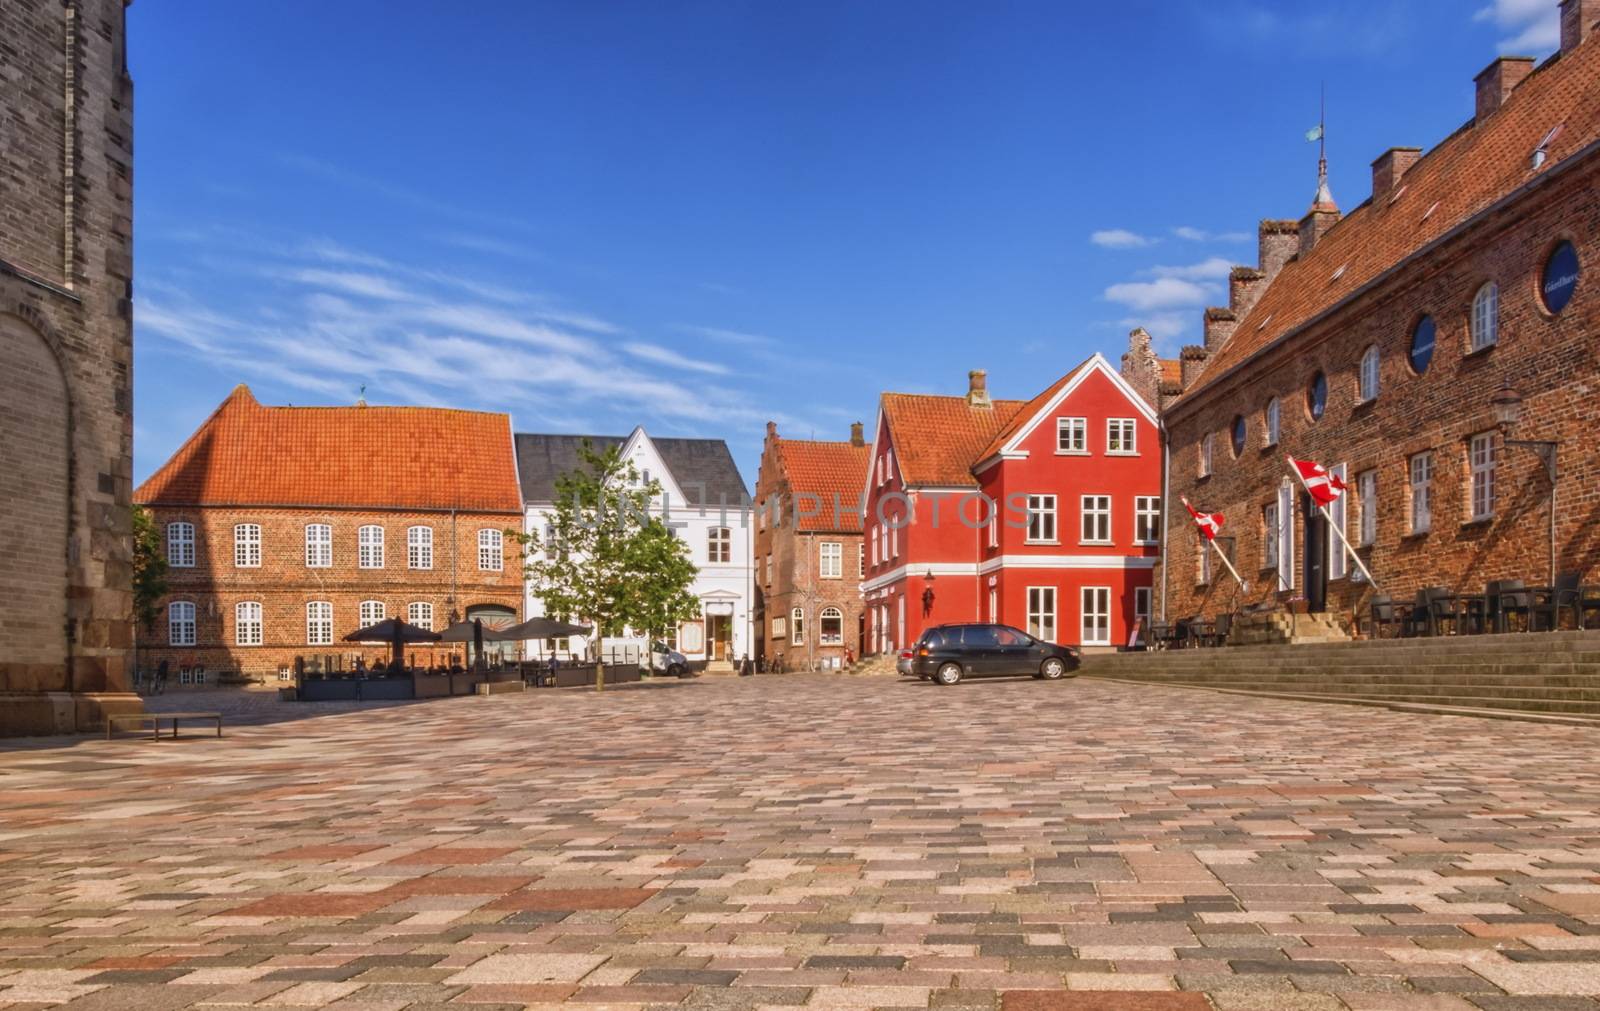 Our Lady Maria Cathedral square in Ribe, Denmark by Elenaphotos21